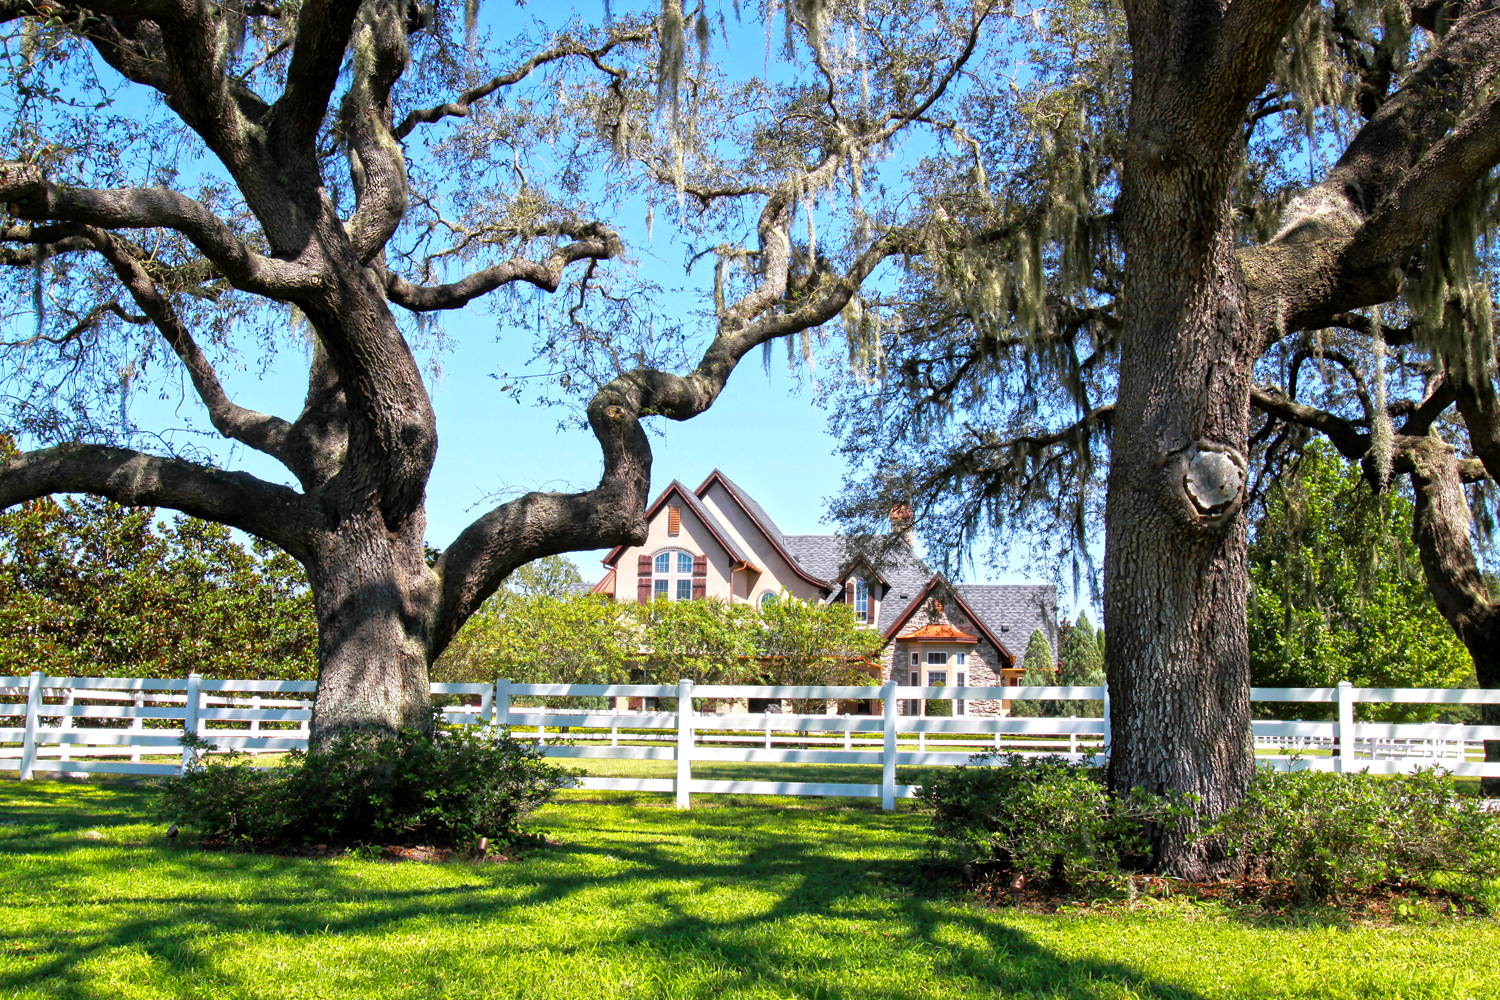 50 planted live oak trees, irrigated — surrounding perimeter of property